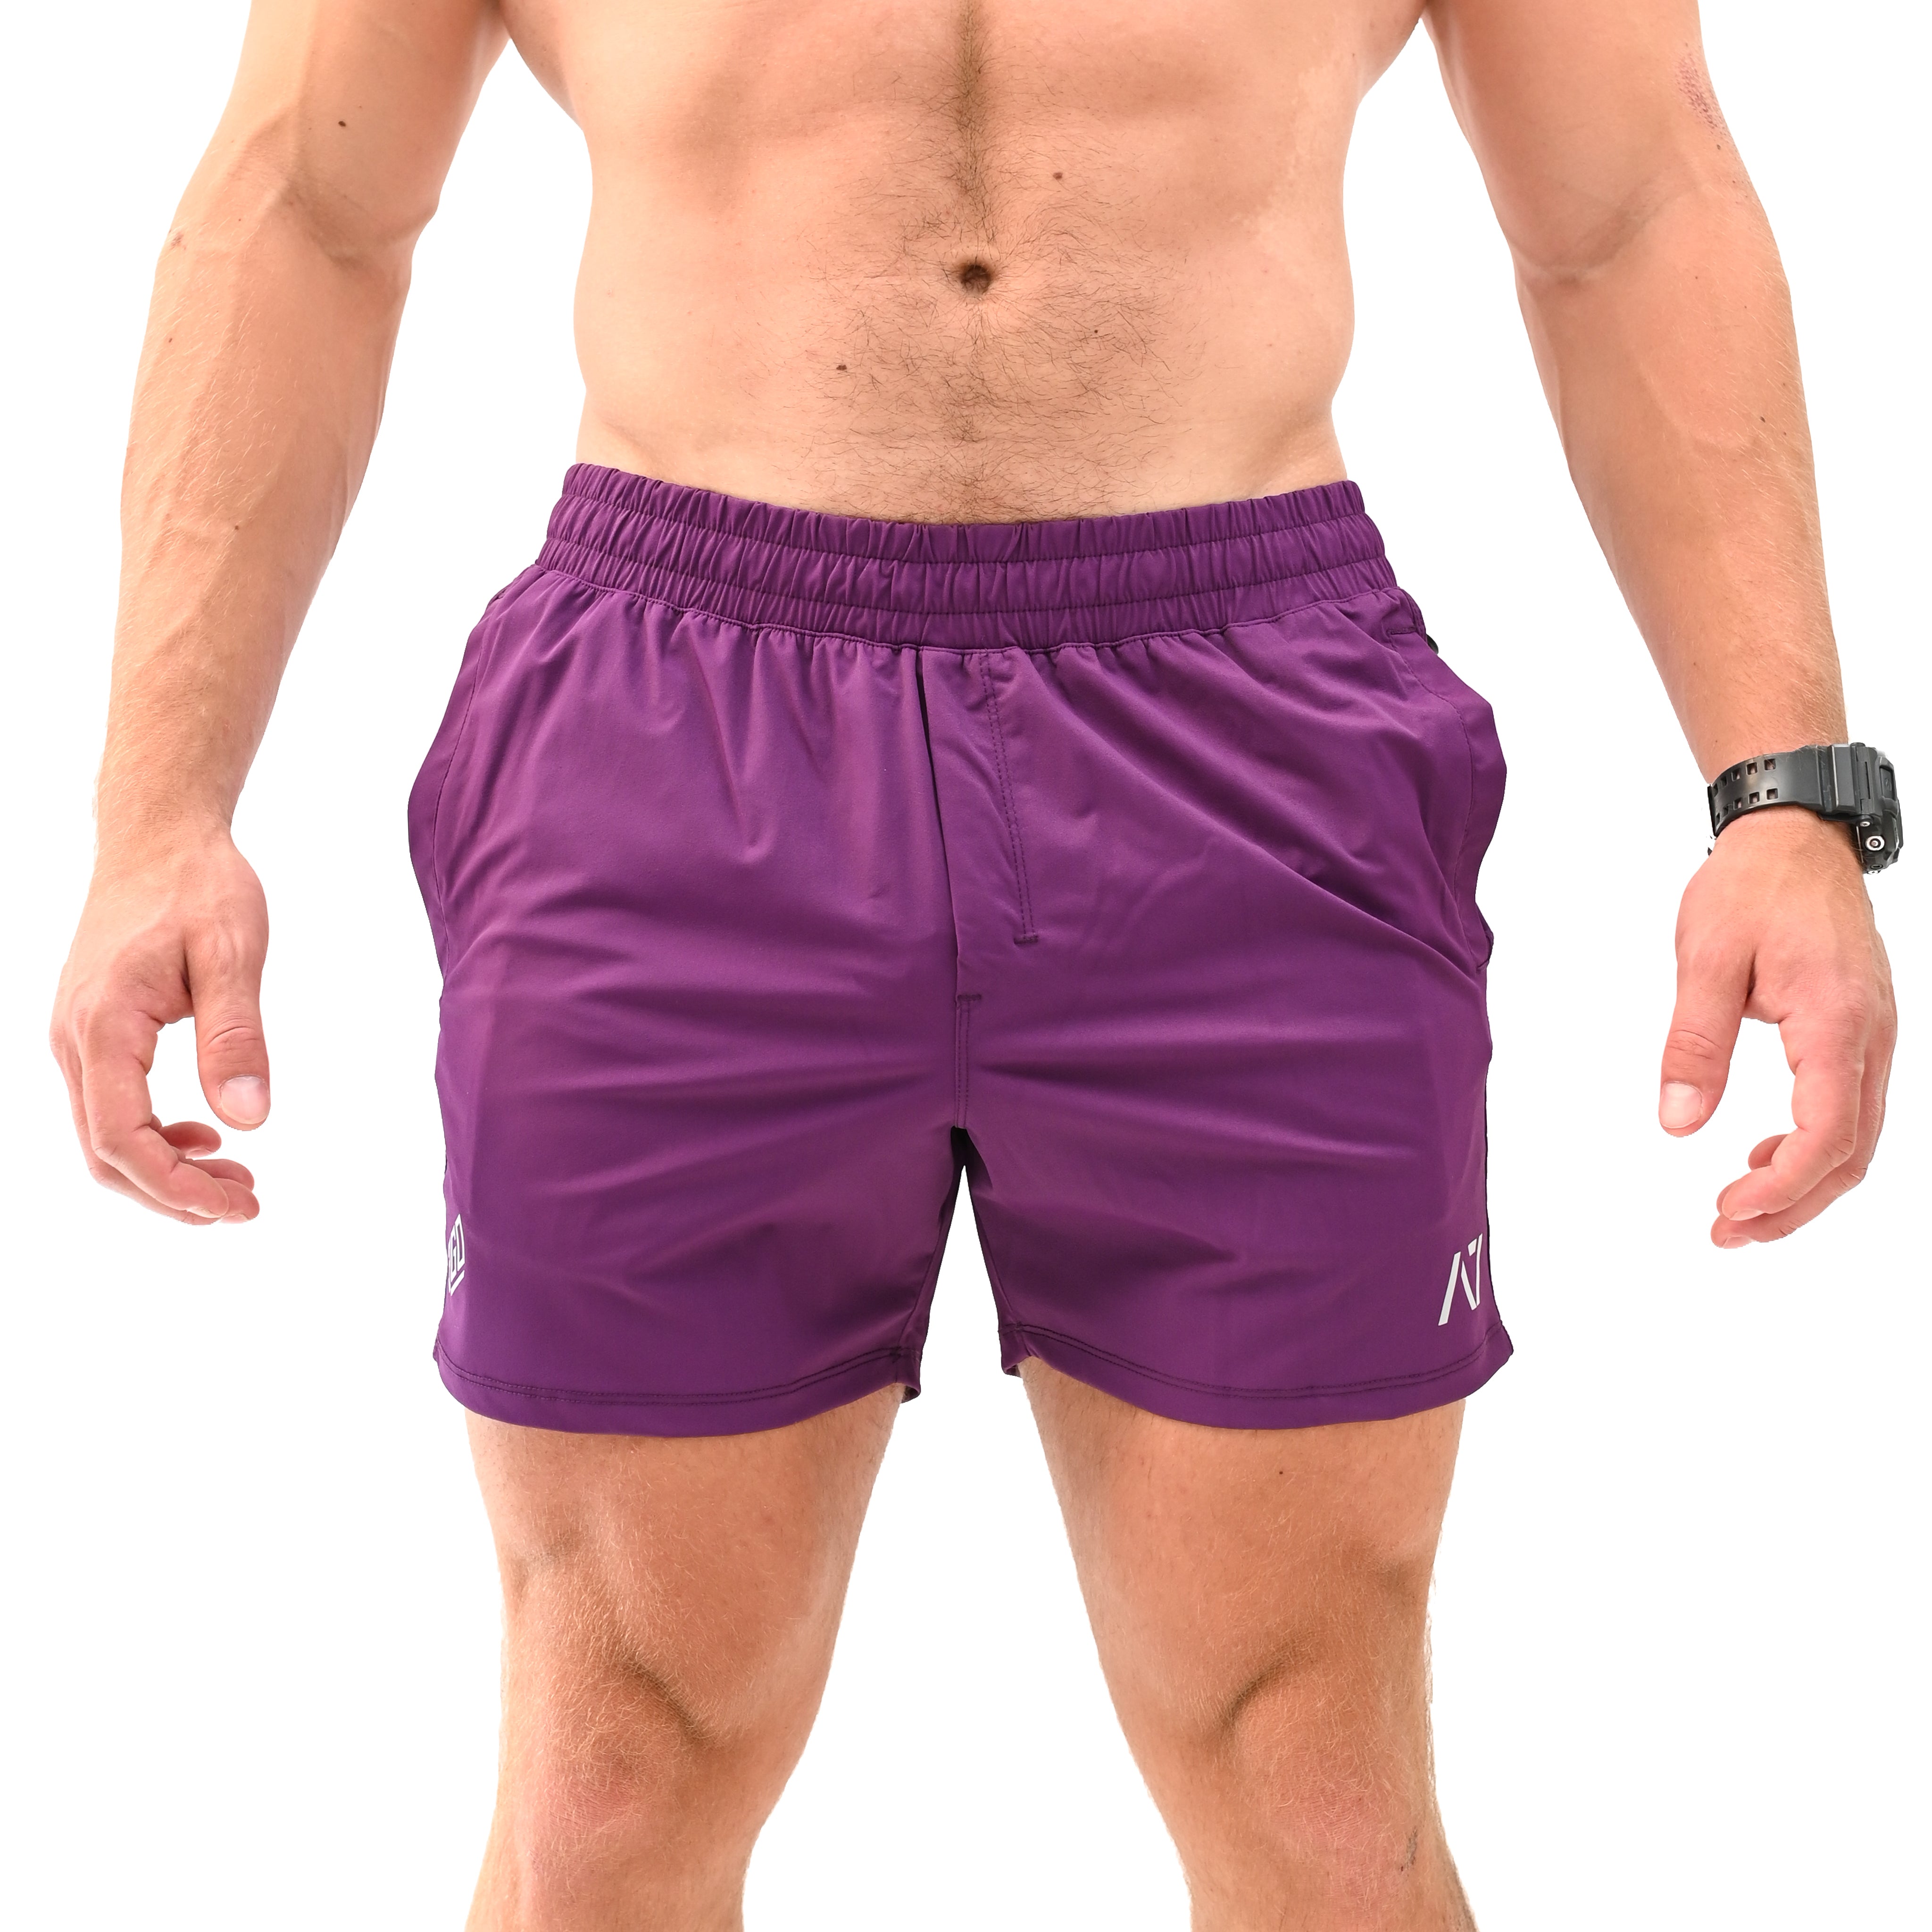 Berry 360-GO KWD shorts were created to provide the flexibility for all the movements in your training while offering the comfort and fit you have come to love through our KWD shorts. Purchase 360-GO KWD shorts from A7 UK and A7 Europe. 360-GO KWD shorts are perfect for powerlifting and weightlifting training. Available in UK and Europe including France, Italy, Germany, the Netherlands, Sweden and Poland.